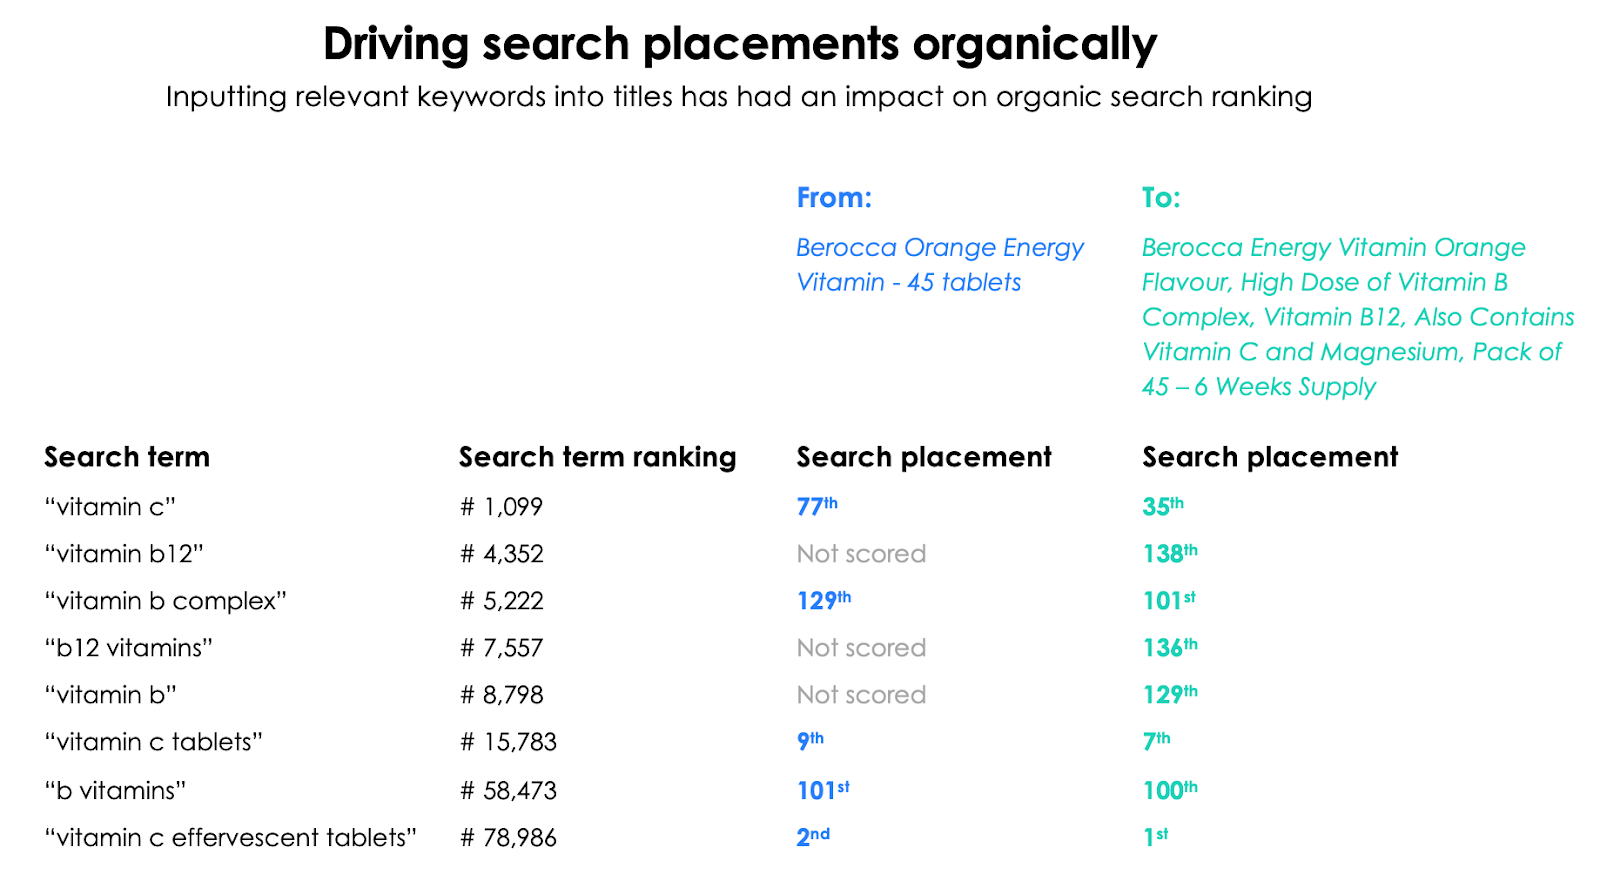 Driving search placement organically